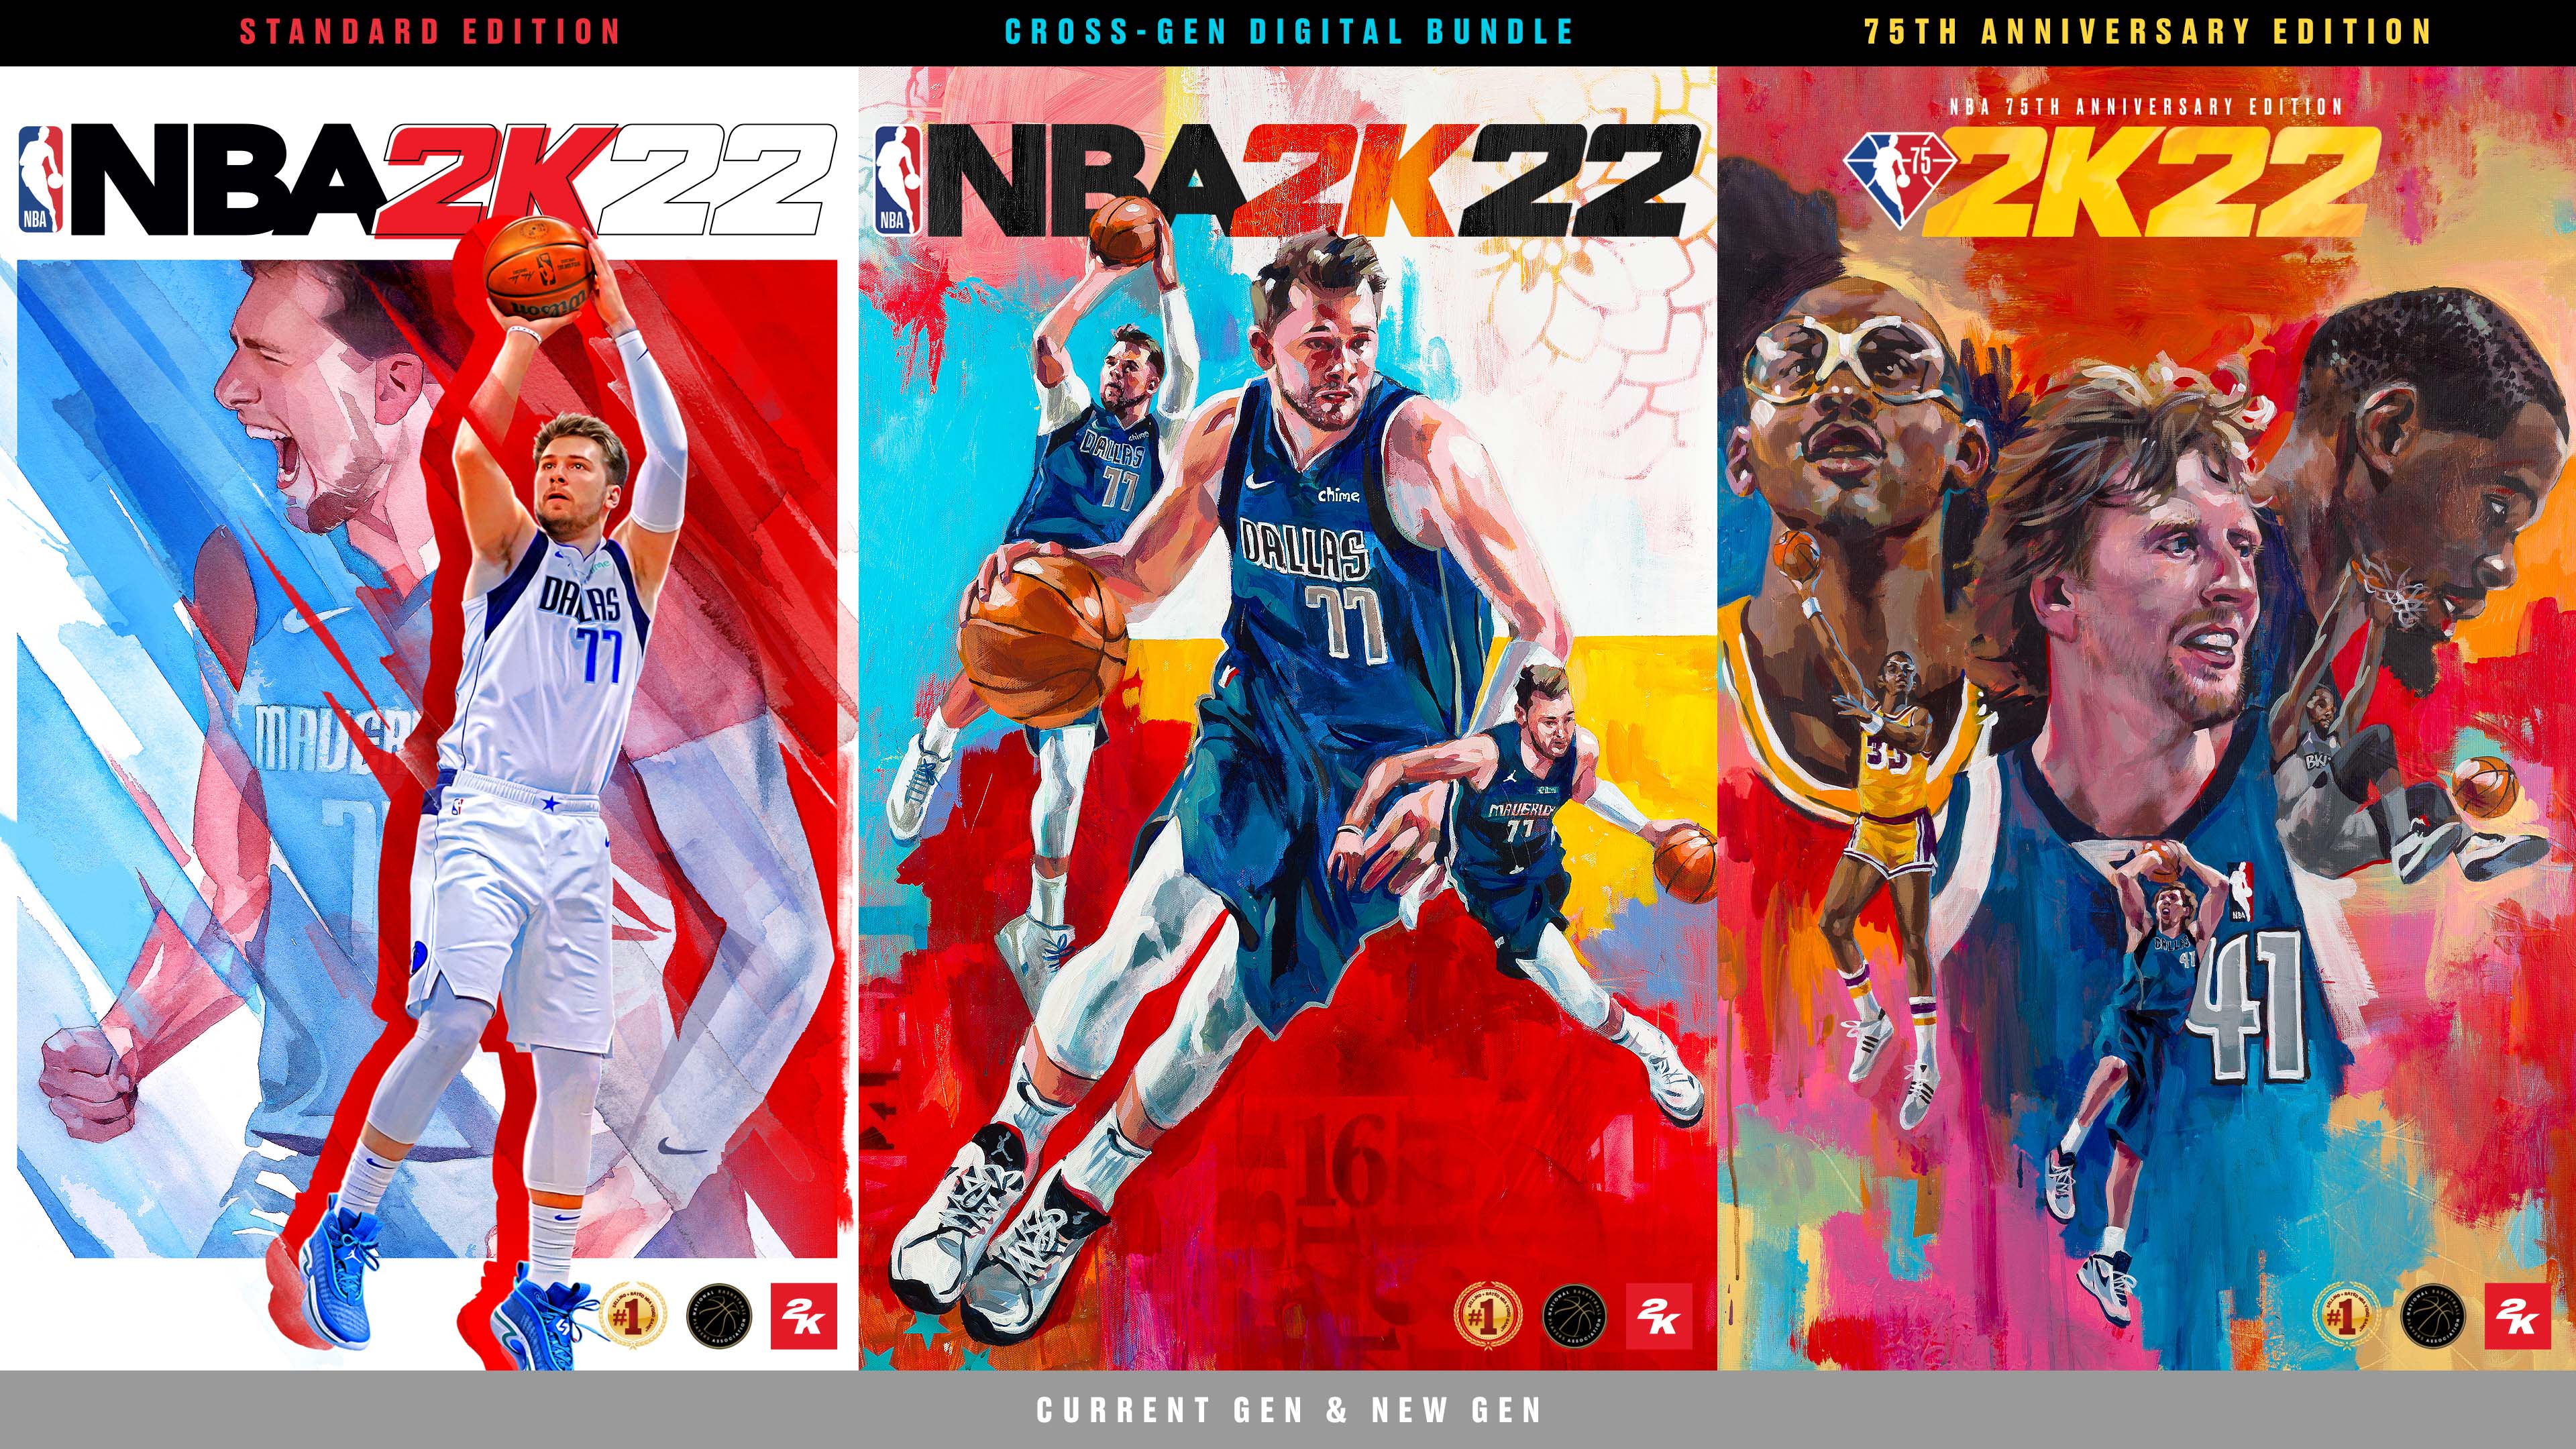 NBA 2K22 now available in the Philippines | NBA.com Philippines